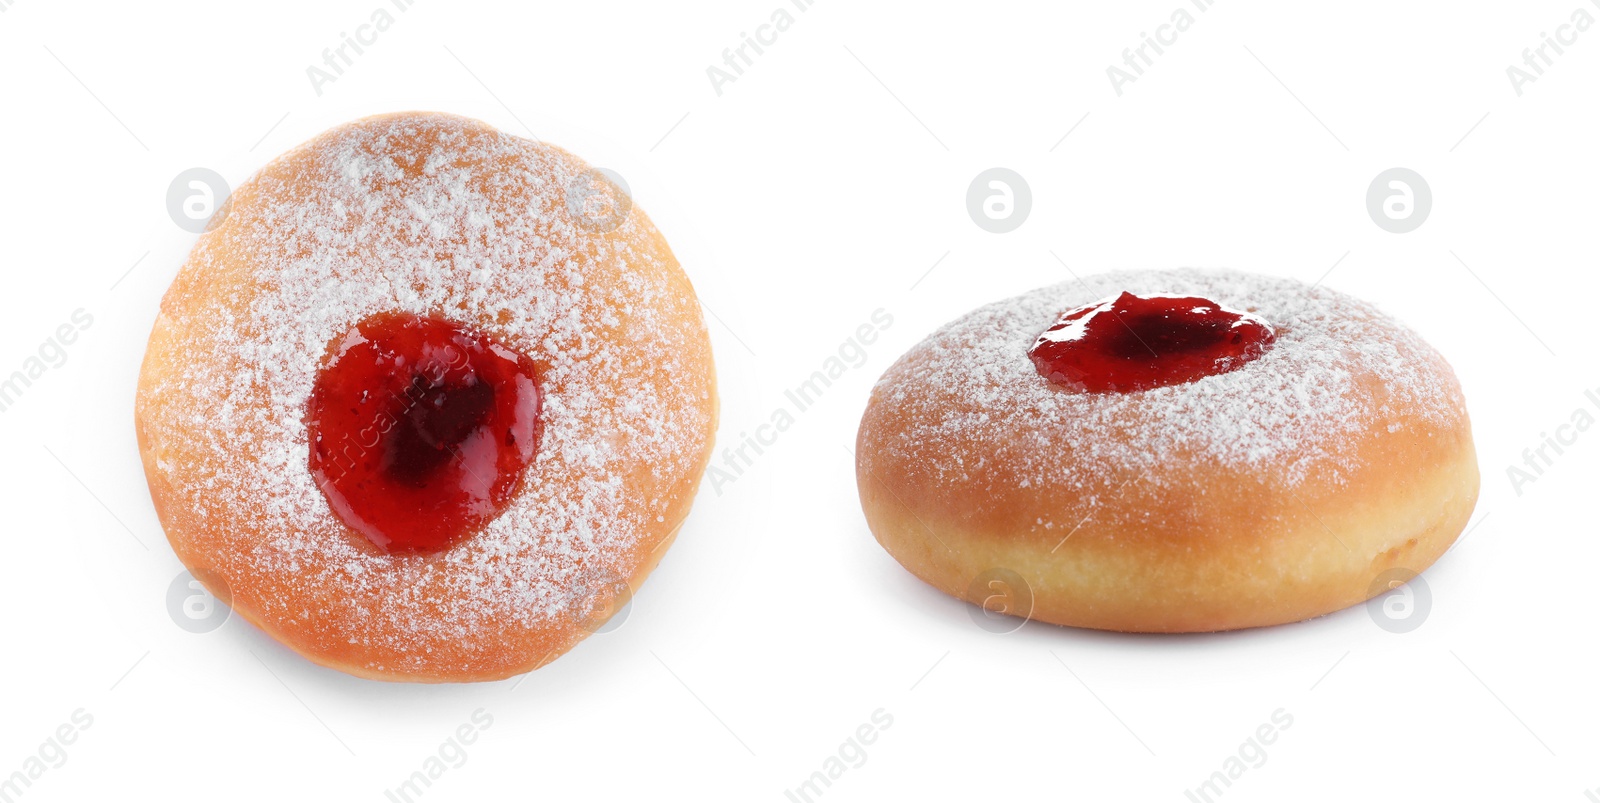 Image of Hanukkah doughnuts with jelly and sugar powder on white background 